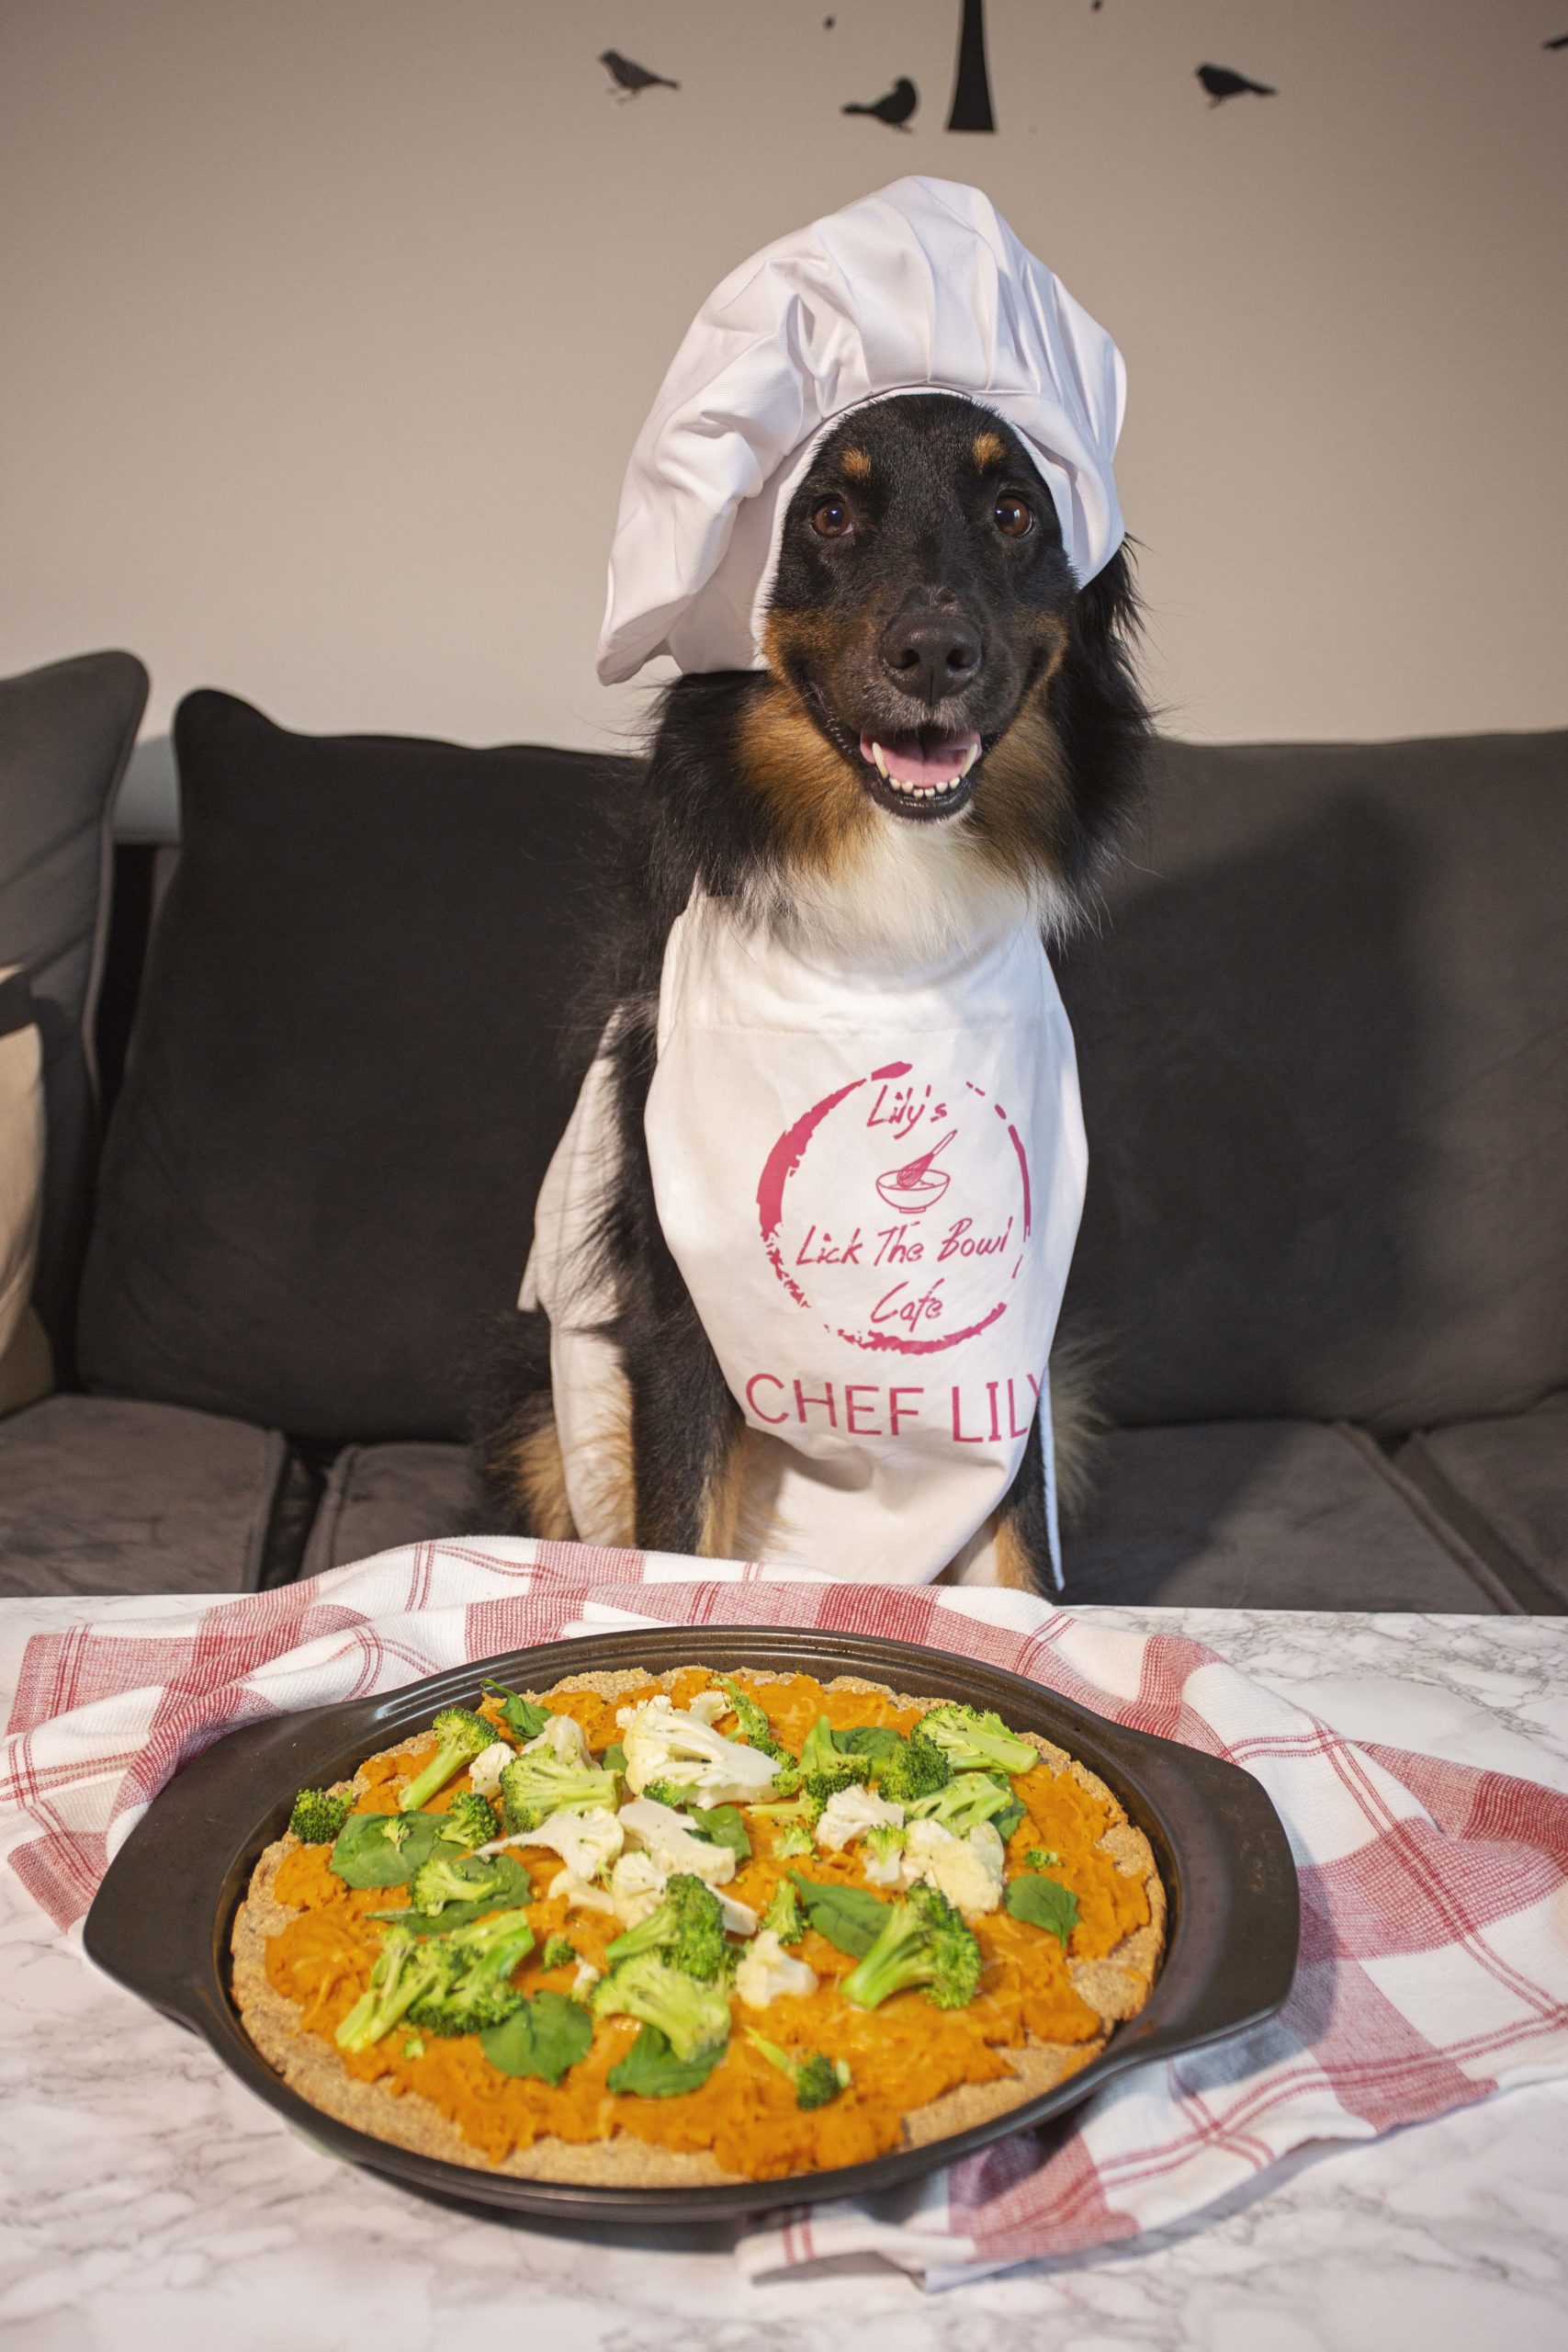 Australian shepherd wearing an apron and chef hat in front of a pizza